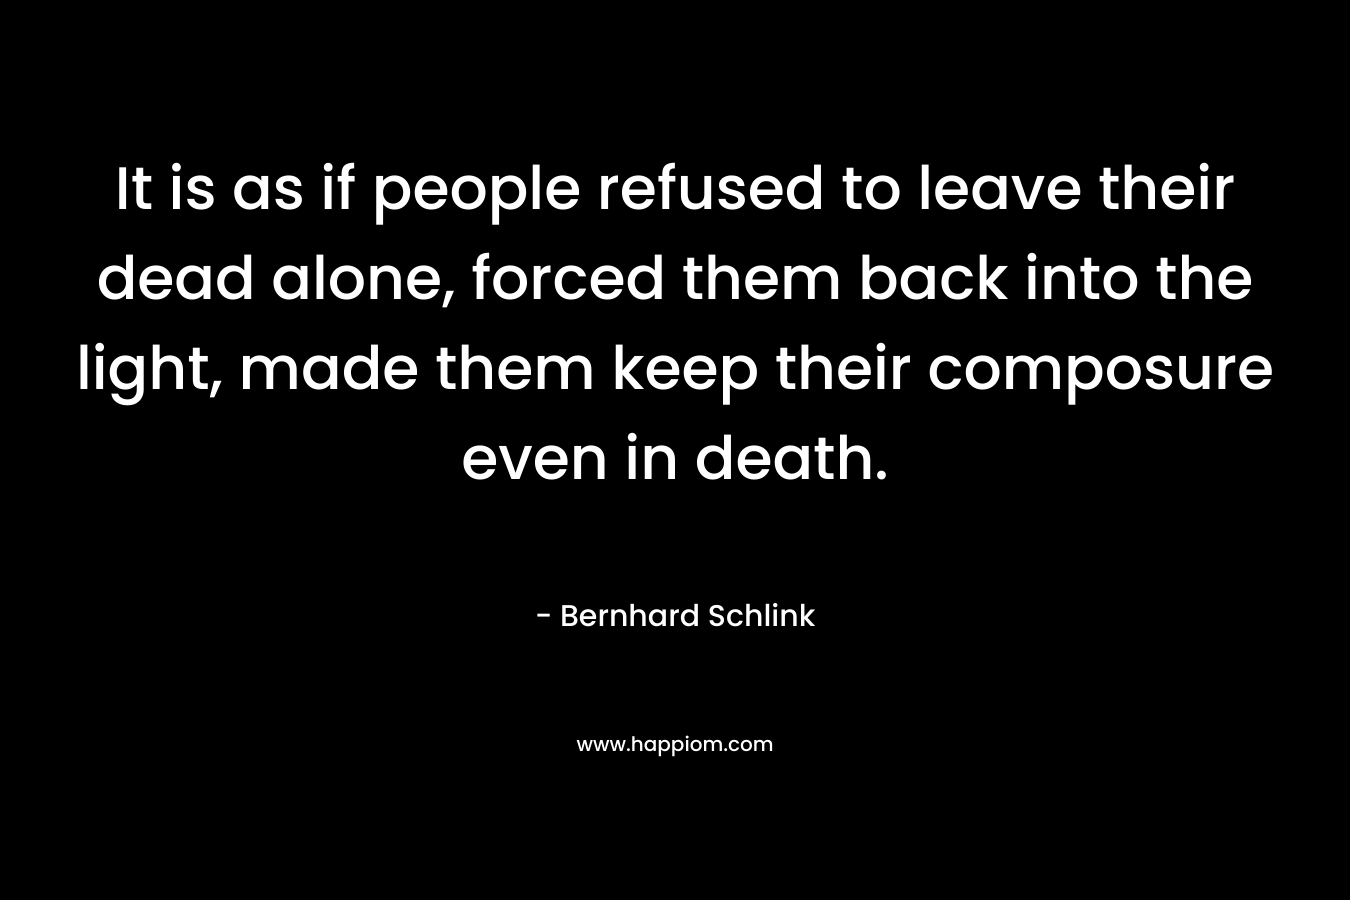 It is as if people refused to leave their dead alone, forced them back into the light, made them keep their composure even in death.